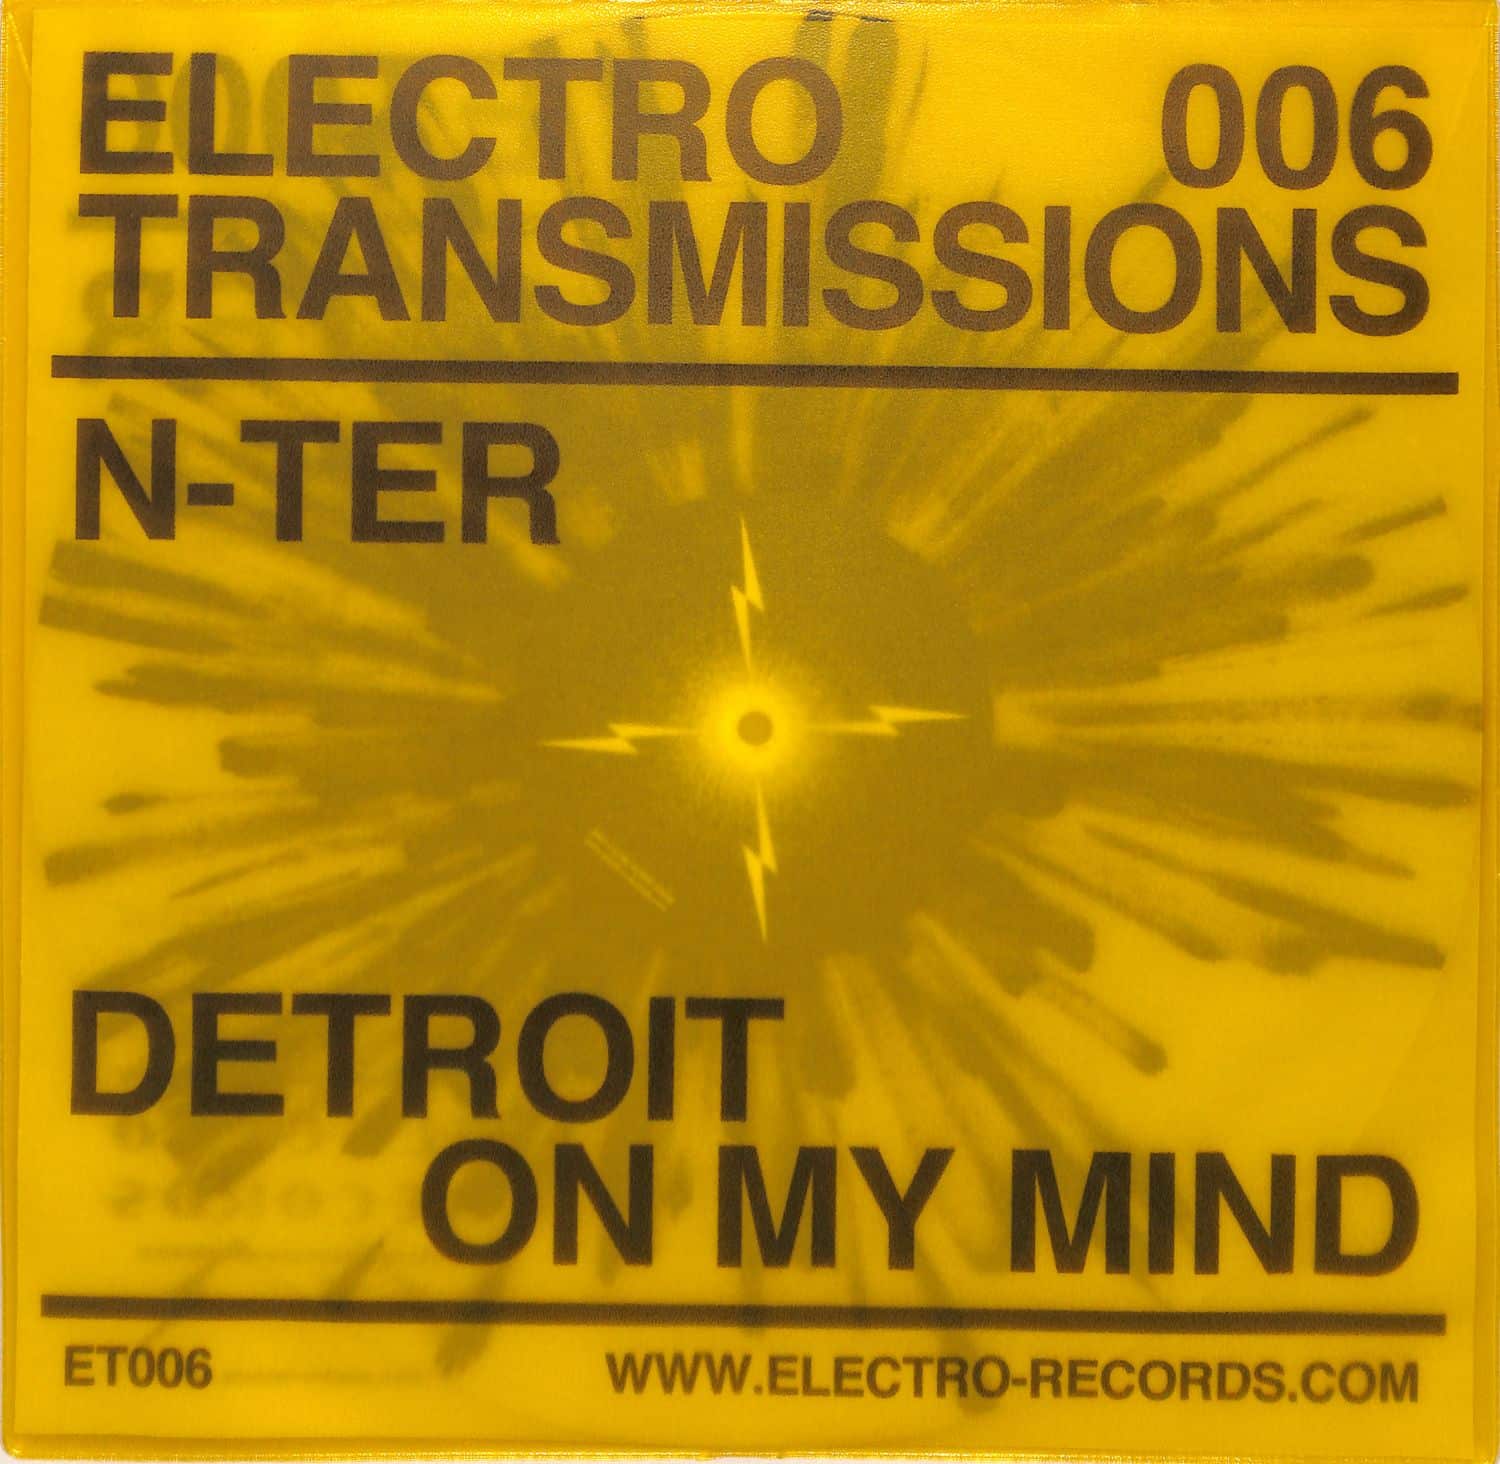 N-TER - ELECTRO TRANSMISSIONS 006 DETROIT ON MY MIND EP